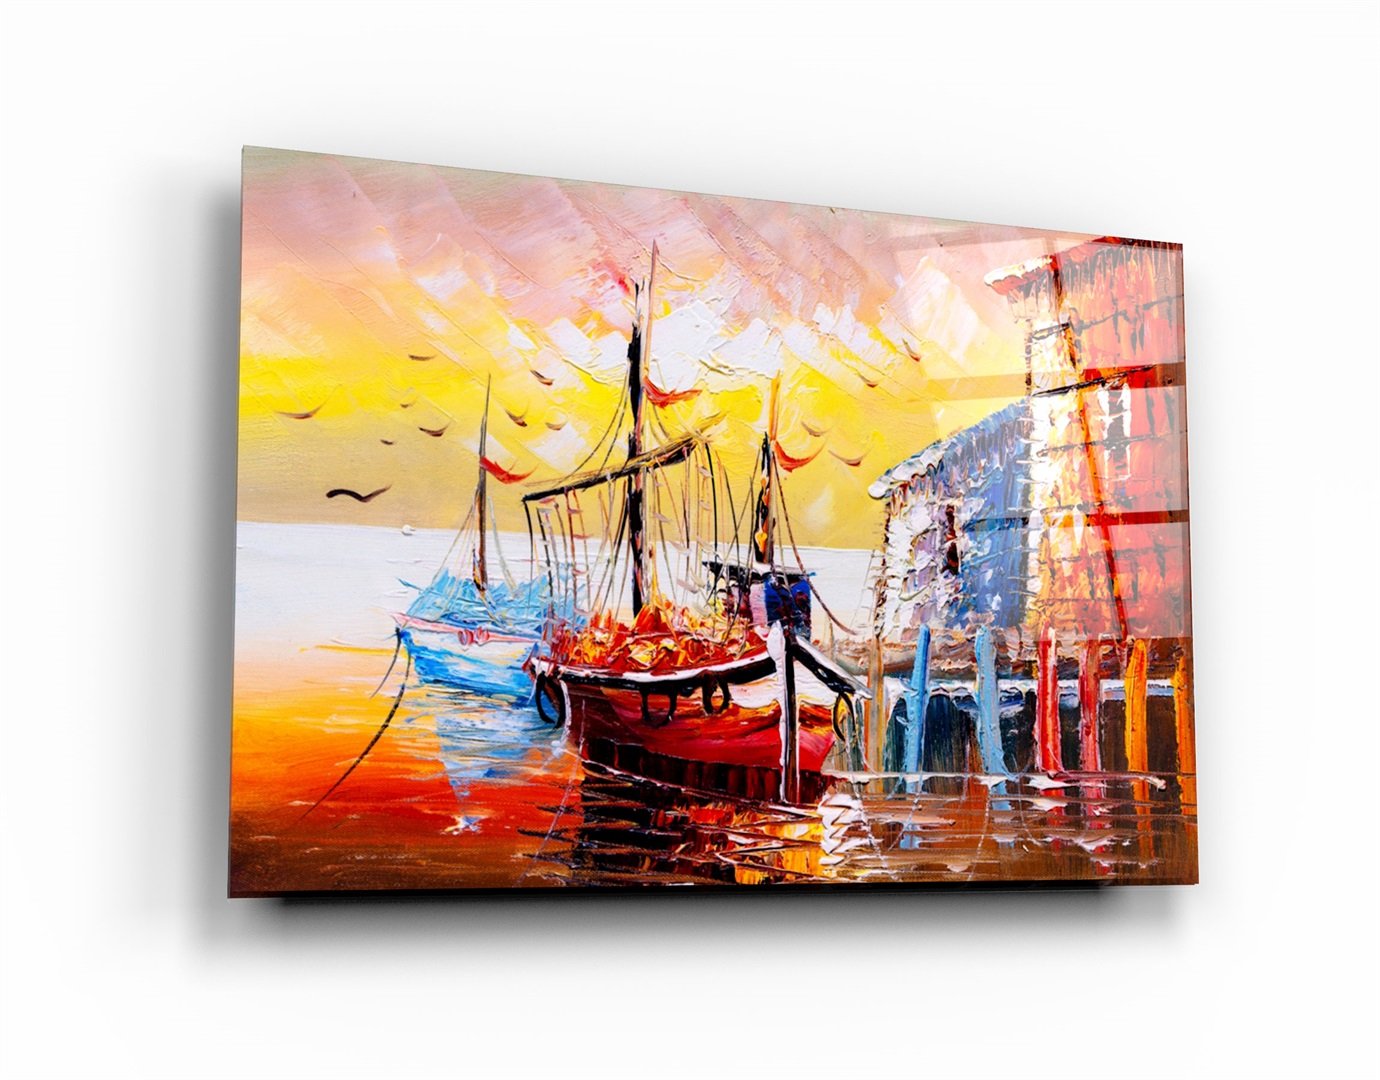 ・"The Boat Painting"・Glass Wall Art